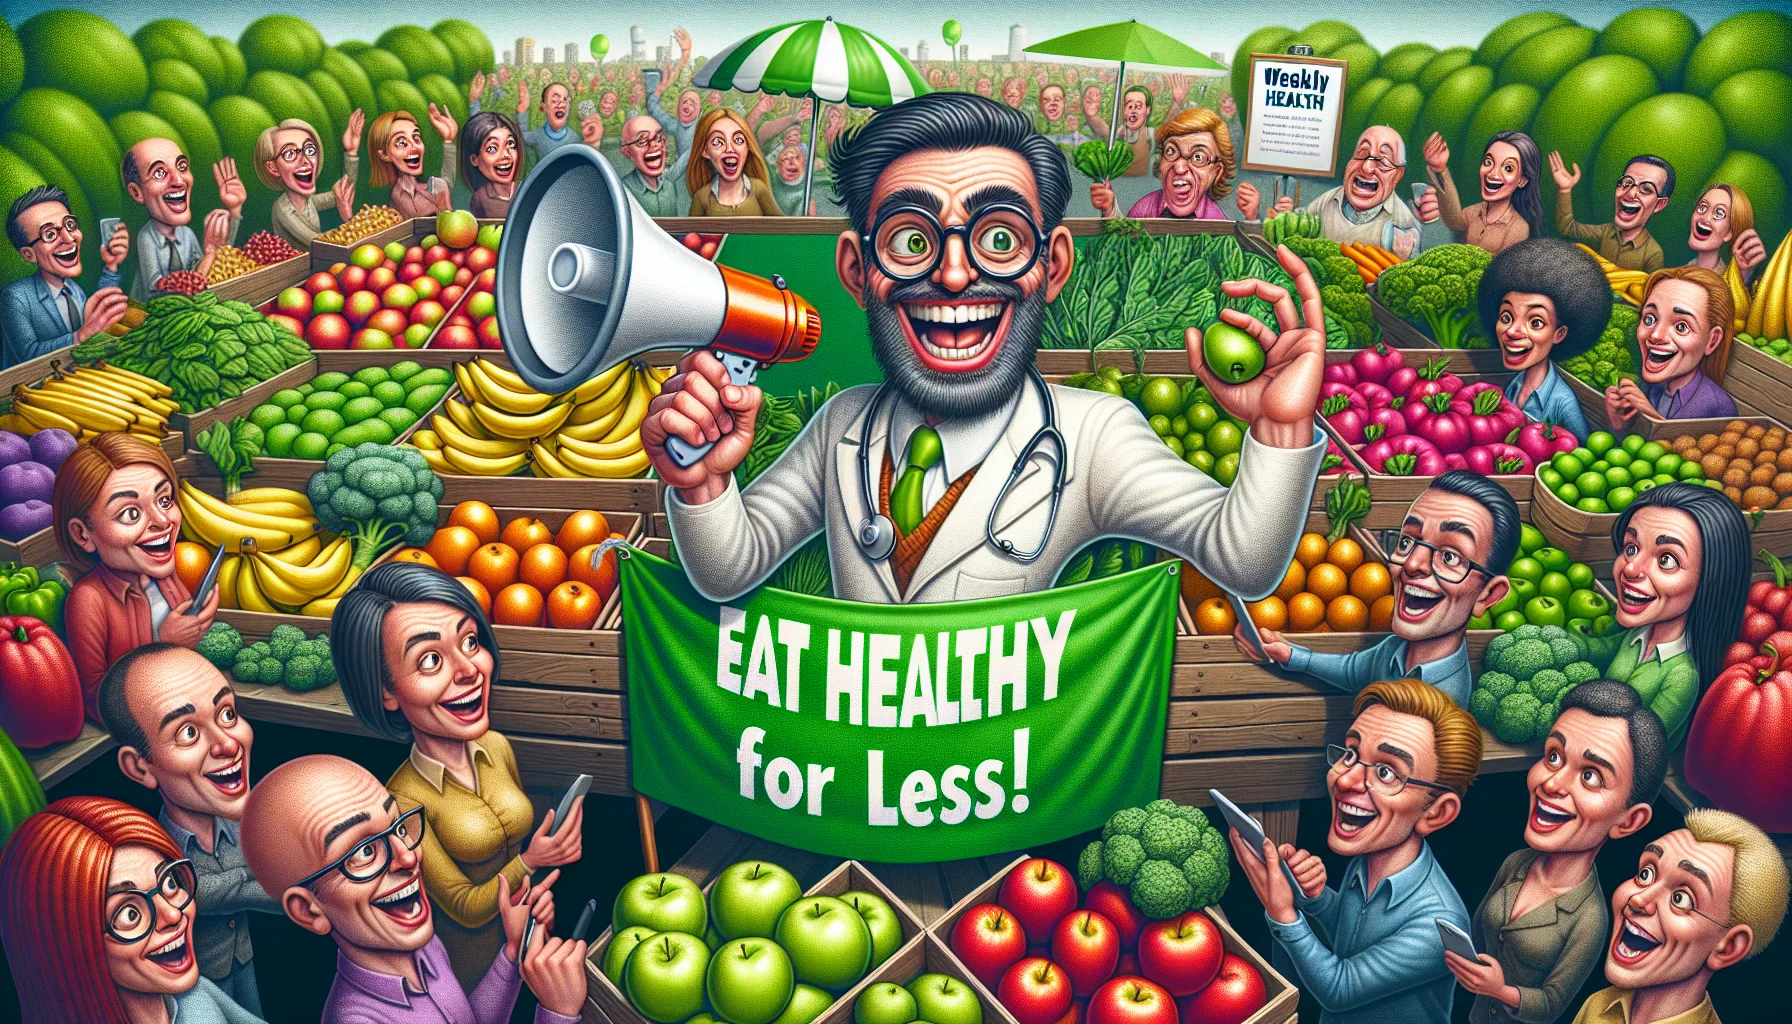 Create a detailed and realistic image of a comical scenario. It features a marketplace filled with vibrant and healthy fruits and vegetables such as apples, bananas, broccoli, and spinach. In the center, a caricature of a happy, smart looking person, perhaps a nutritionist, holds a large green banner reading 'Weekly Health Updates'. This person is carrying a megaphone in their other hand, and they are announcing 'Eat healthy for less!'. Various people around, some laughing, some surprised, are either listening to the announcement or looking at the abundant produce with wide eyes and big smiles.